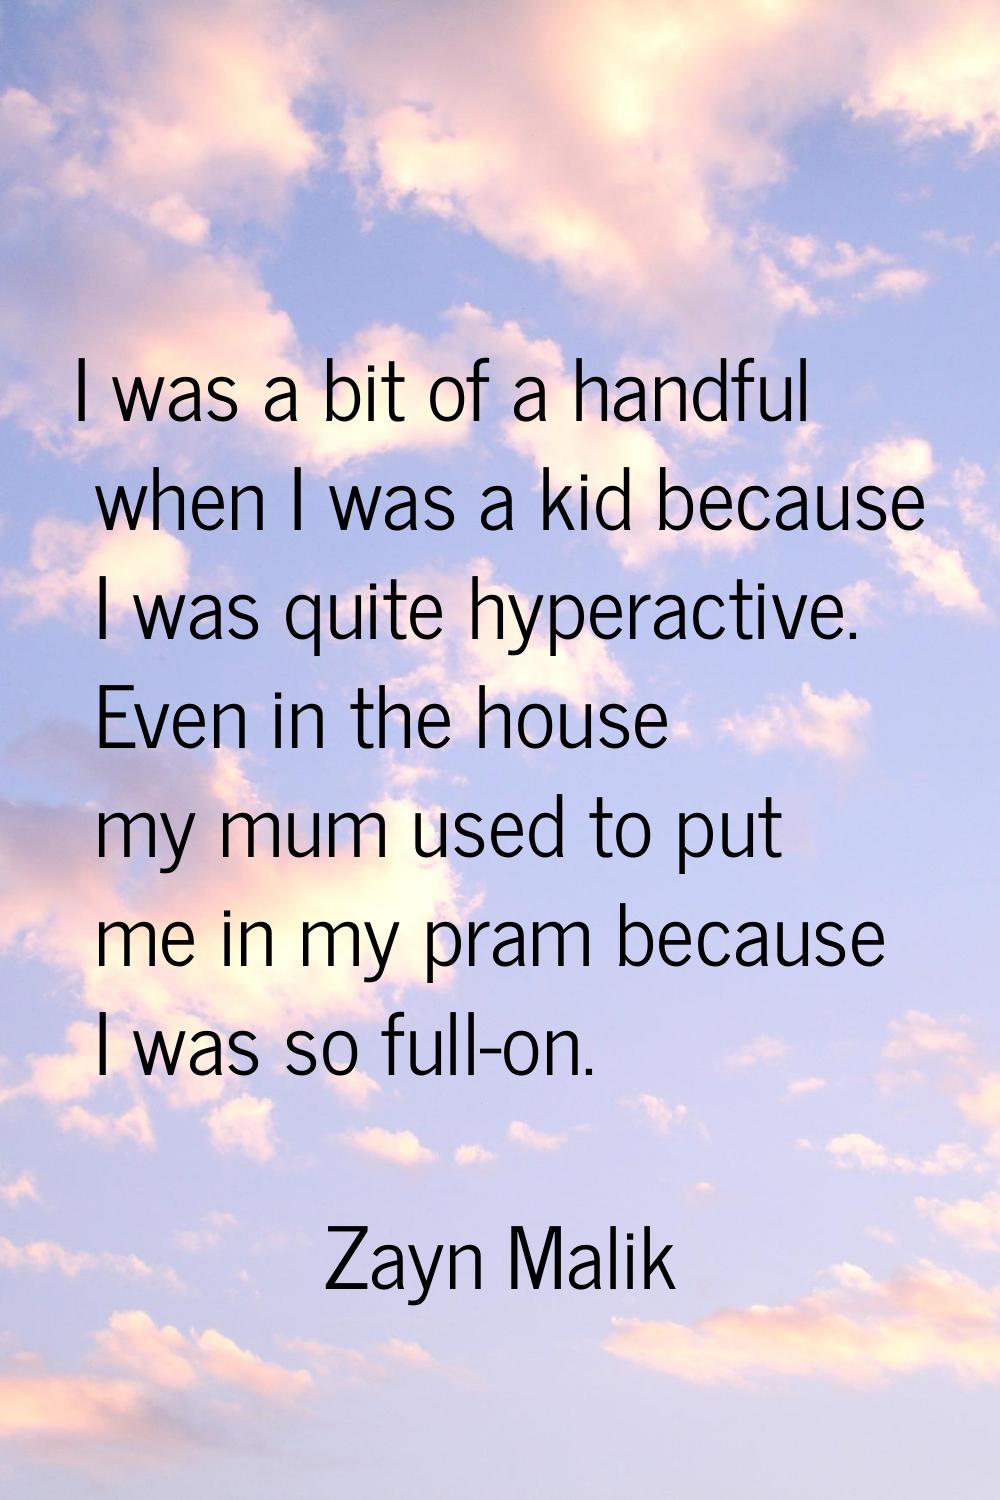 I was a bit of a handful when I was a kid because I was quite hyperactive. Even in the house my mum